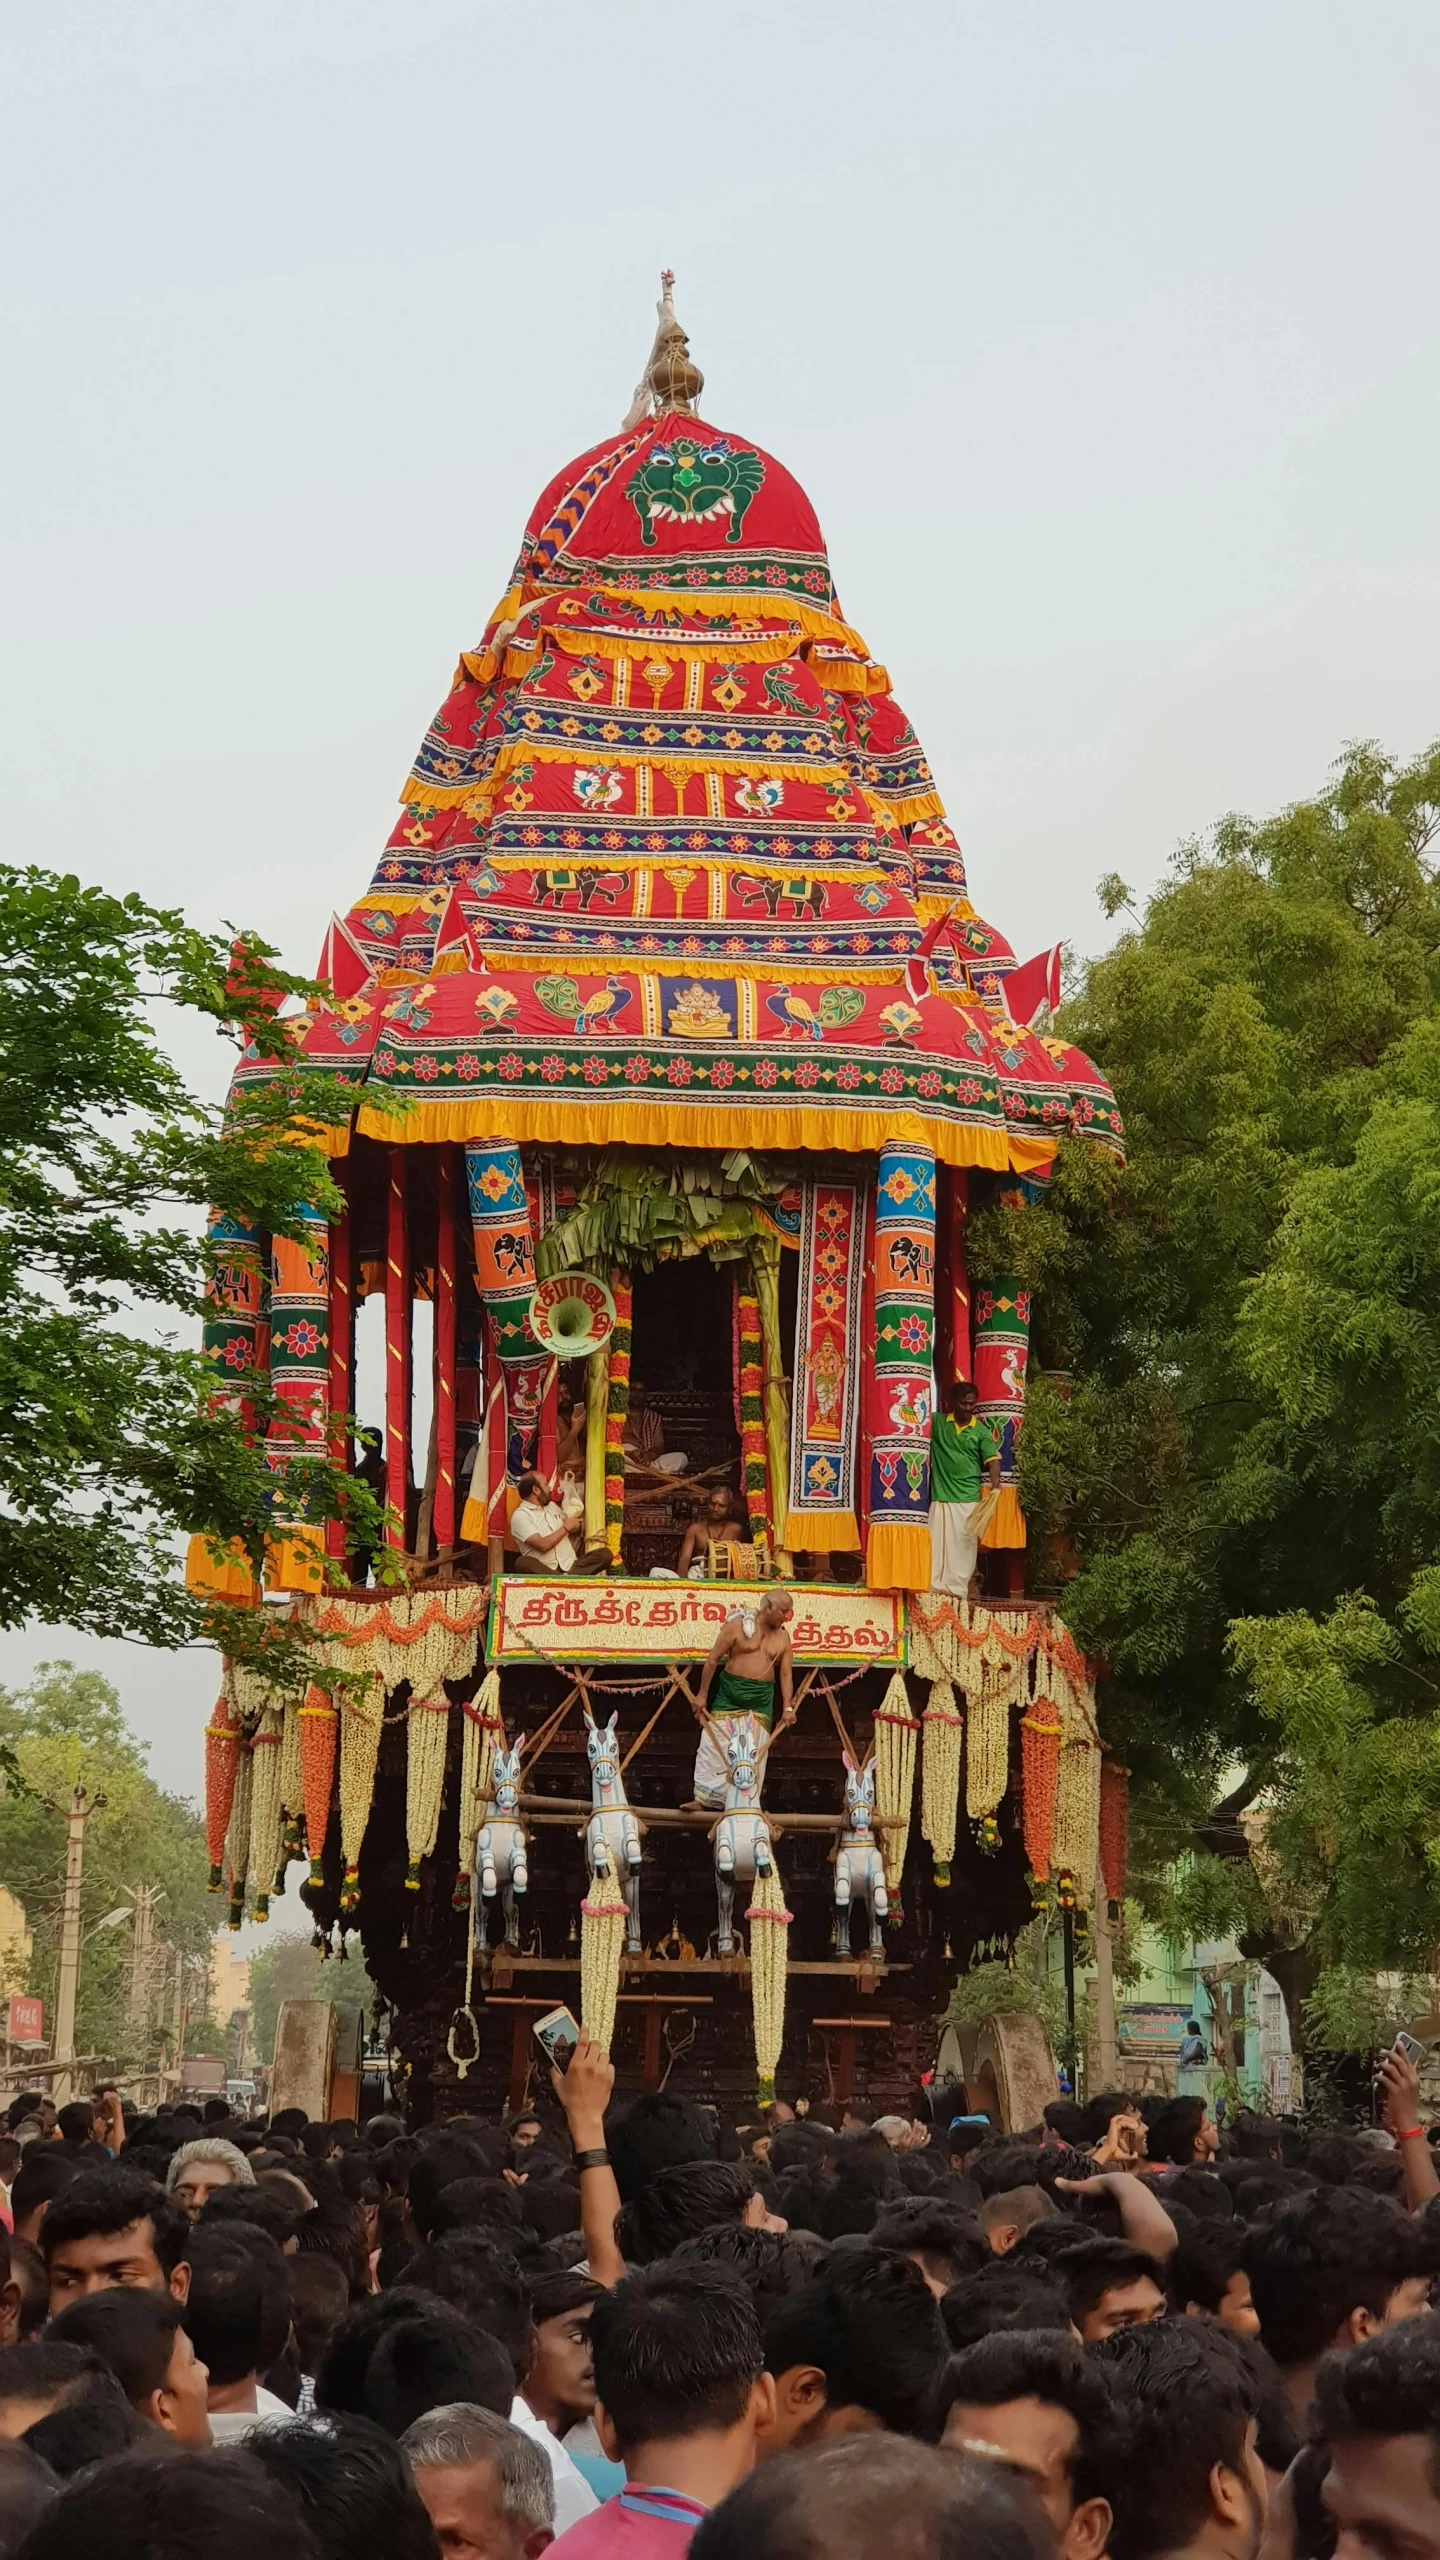 a colorfully decorated indian structure with people